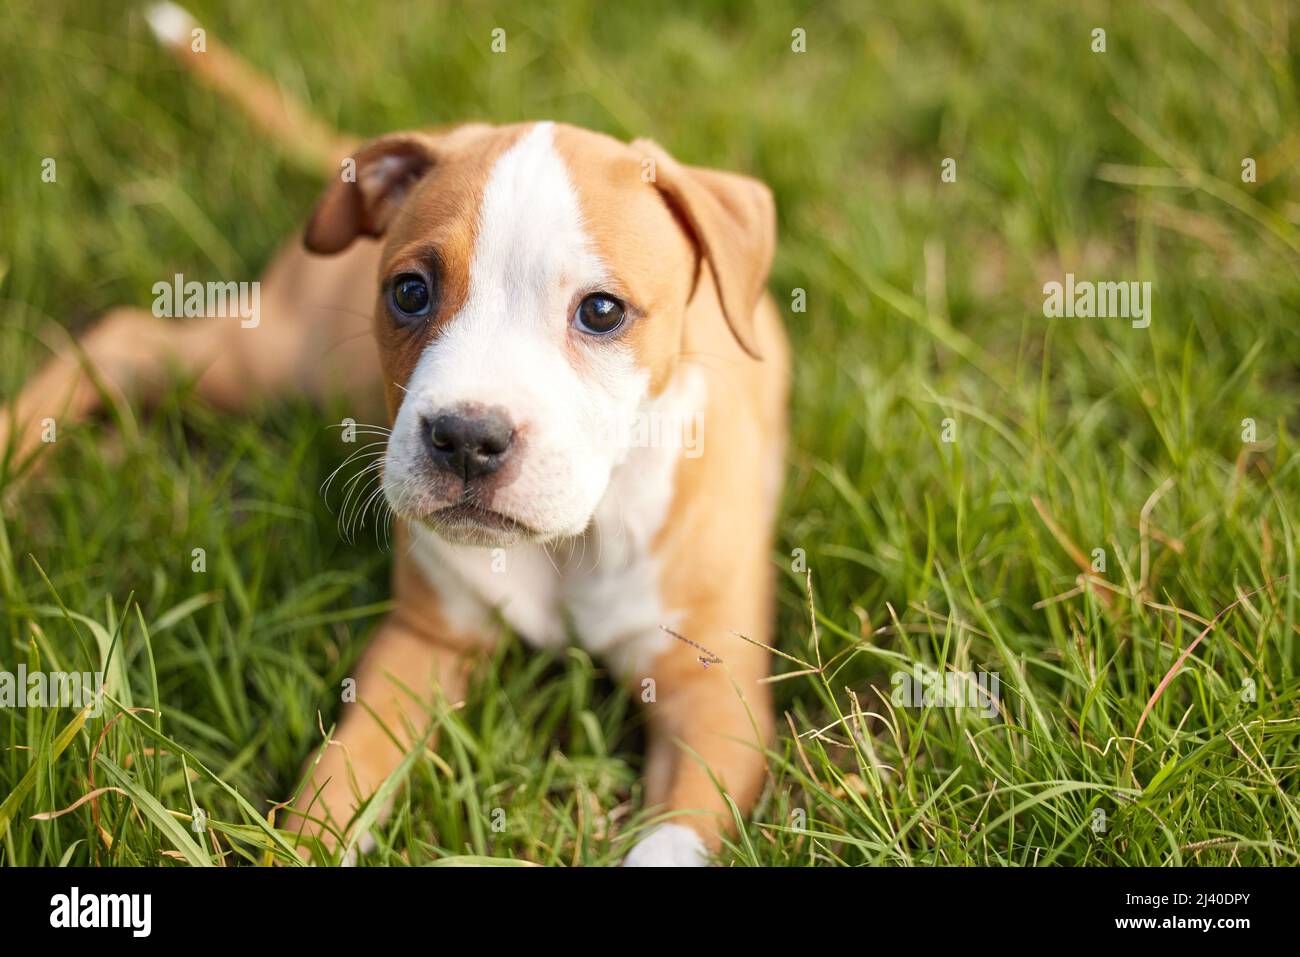 Man,chasing my tail was exhasuting. Shot of young puppy lying on the grass. Stock Photo